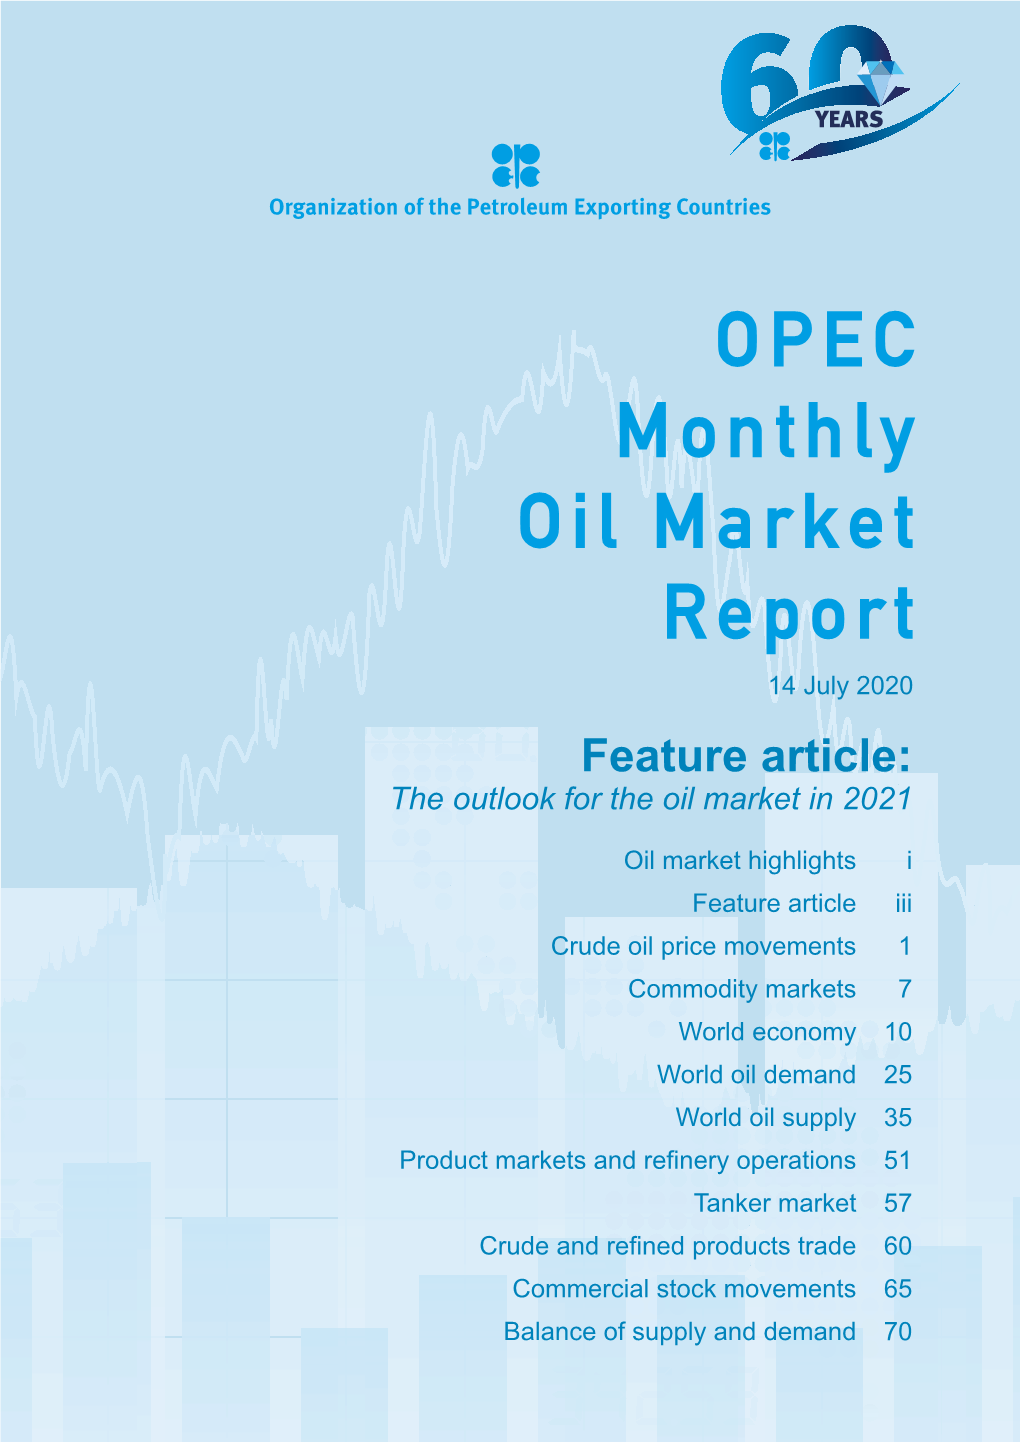 Feature Article: the Outlook for the Oil Market in 2021